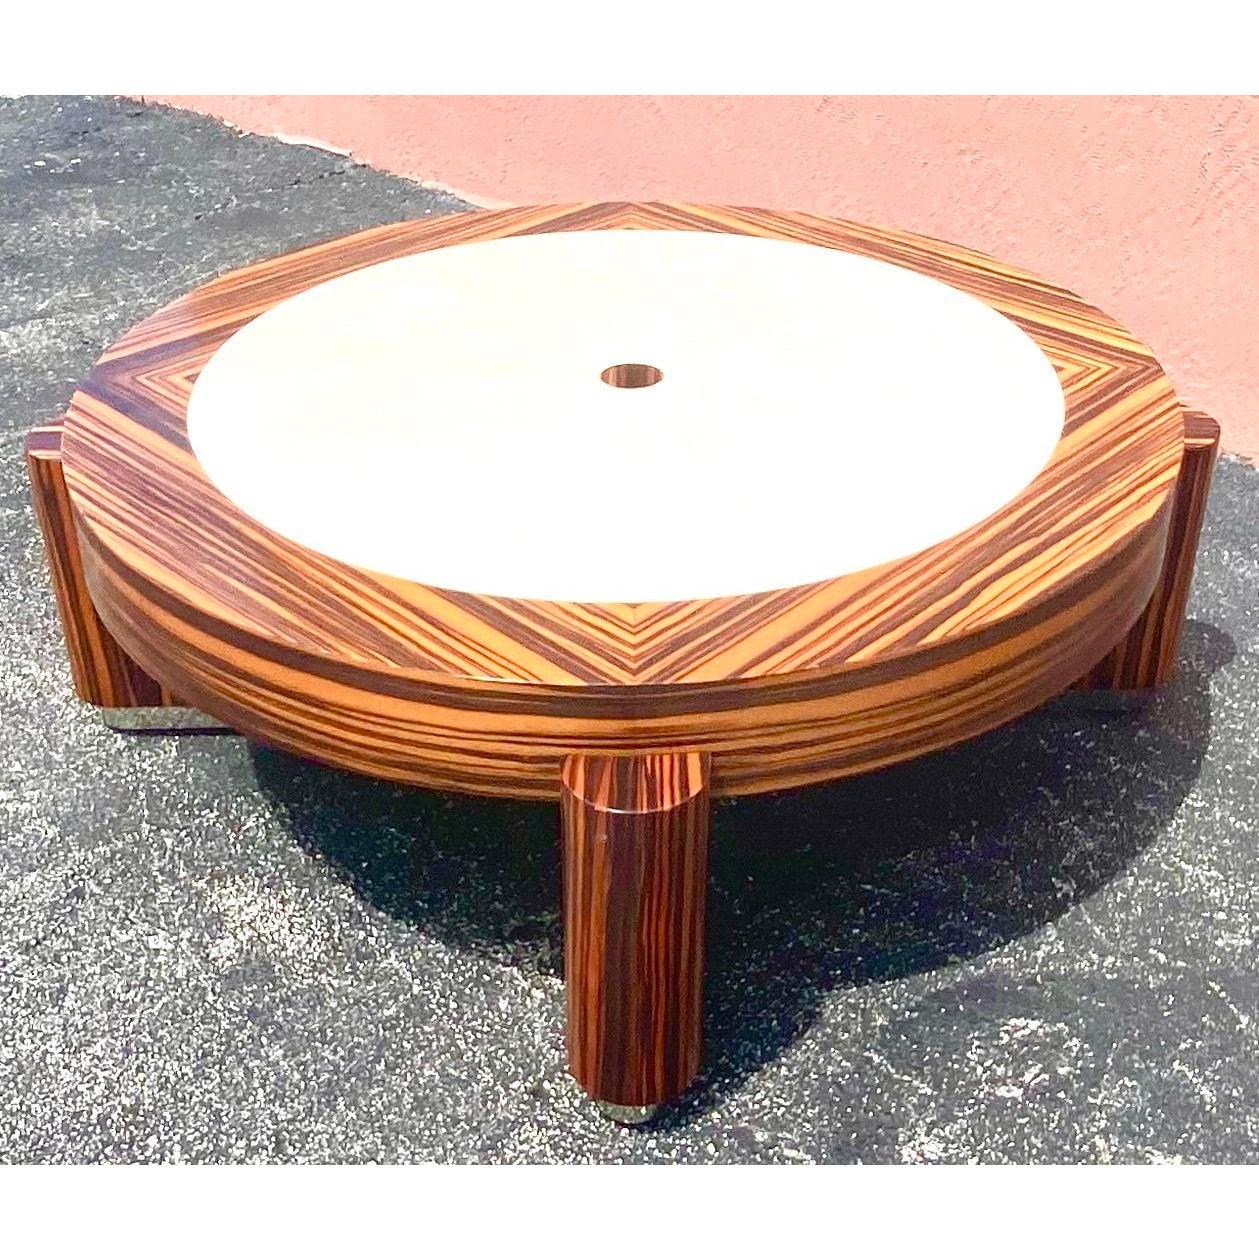 20th Century Contemporary Zebra Wood and Shagreen Coffee Table